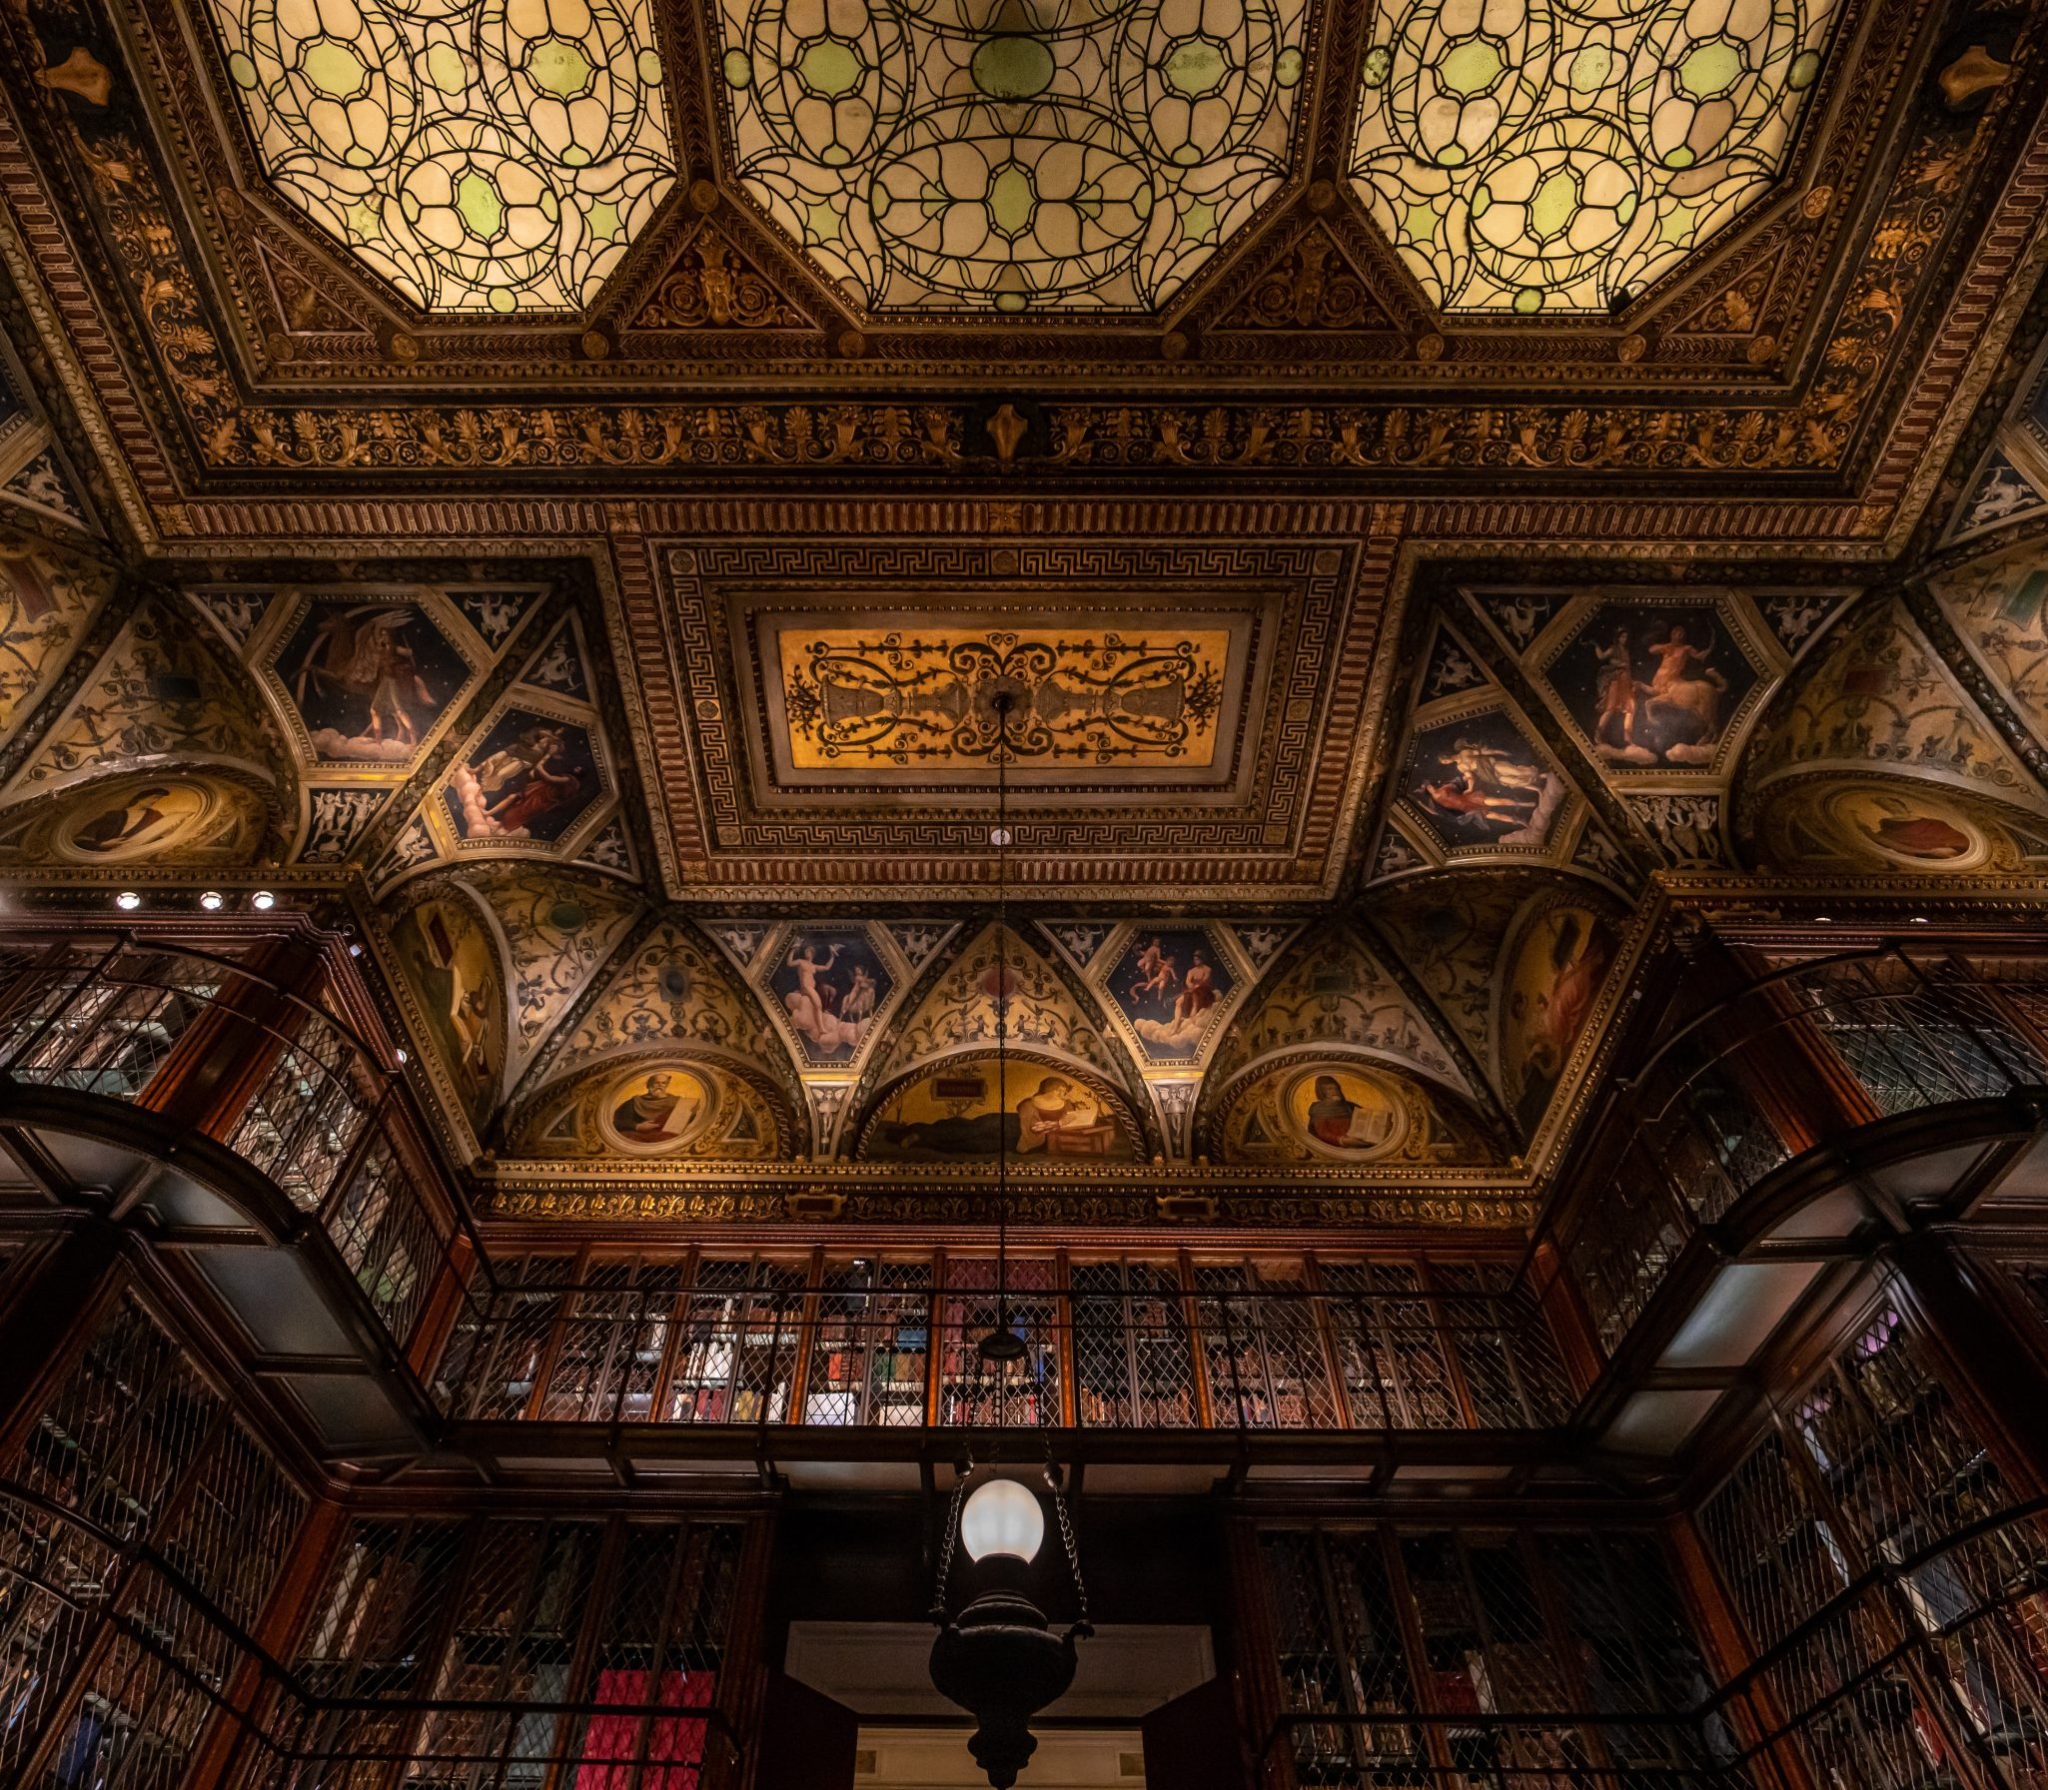 Ceiling of the Morgan library